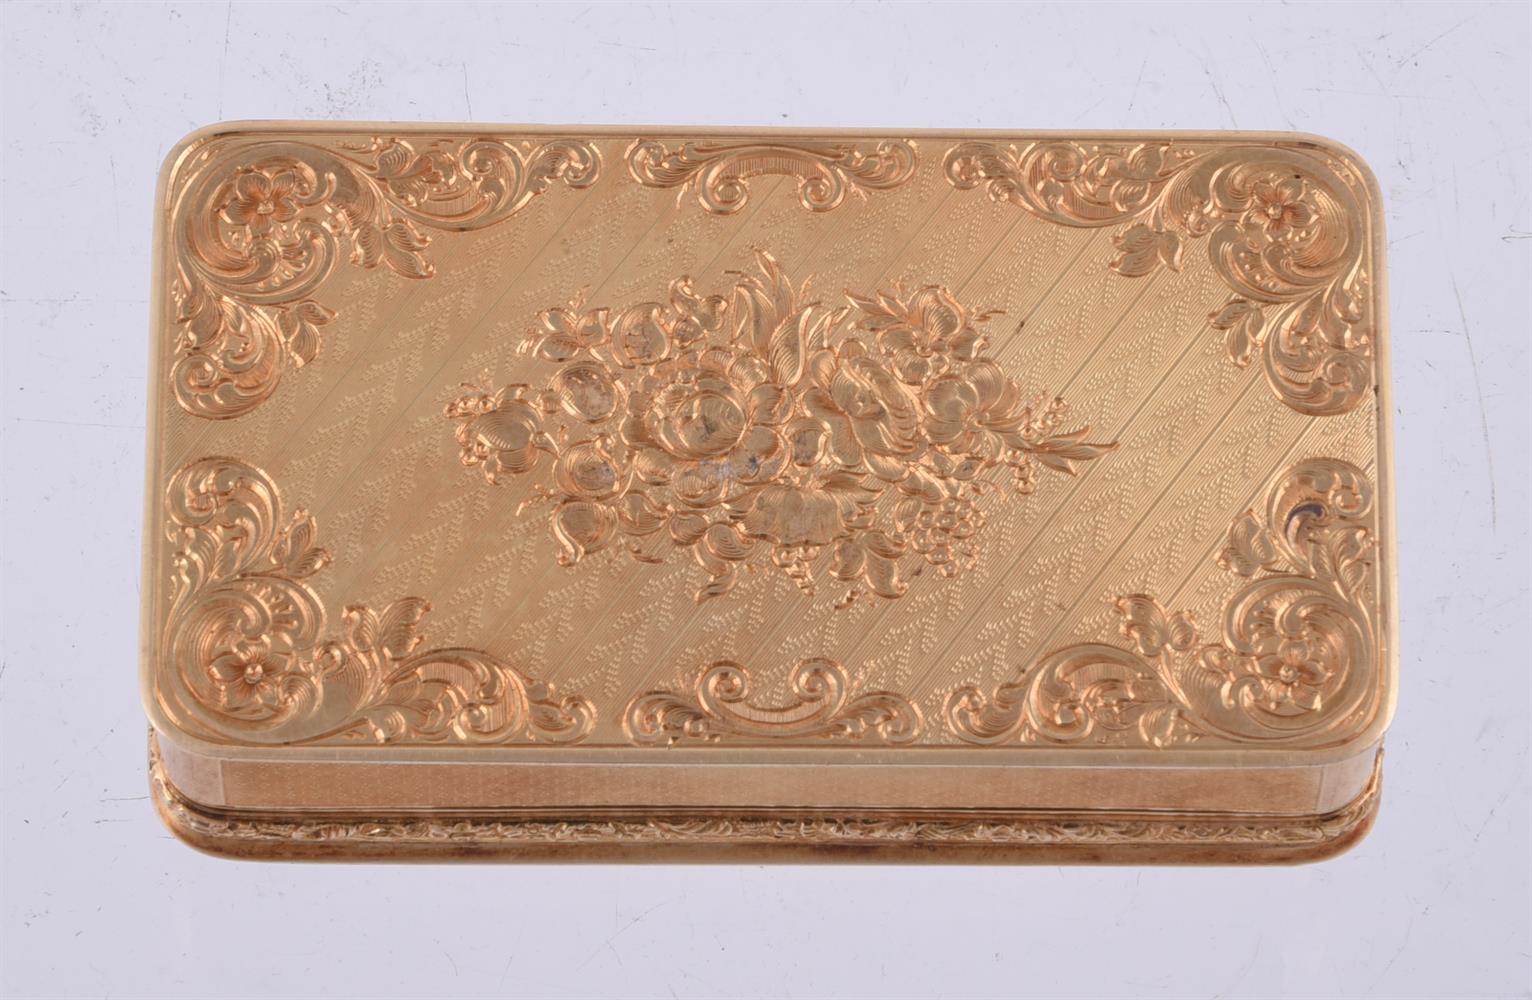 A 19TH CENTURY CONTINENTAL GOLD RECTANGULAR SNUFF BOX - Image 3 of 3